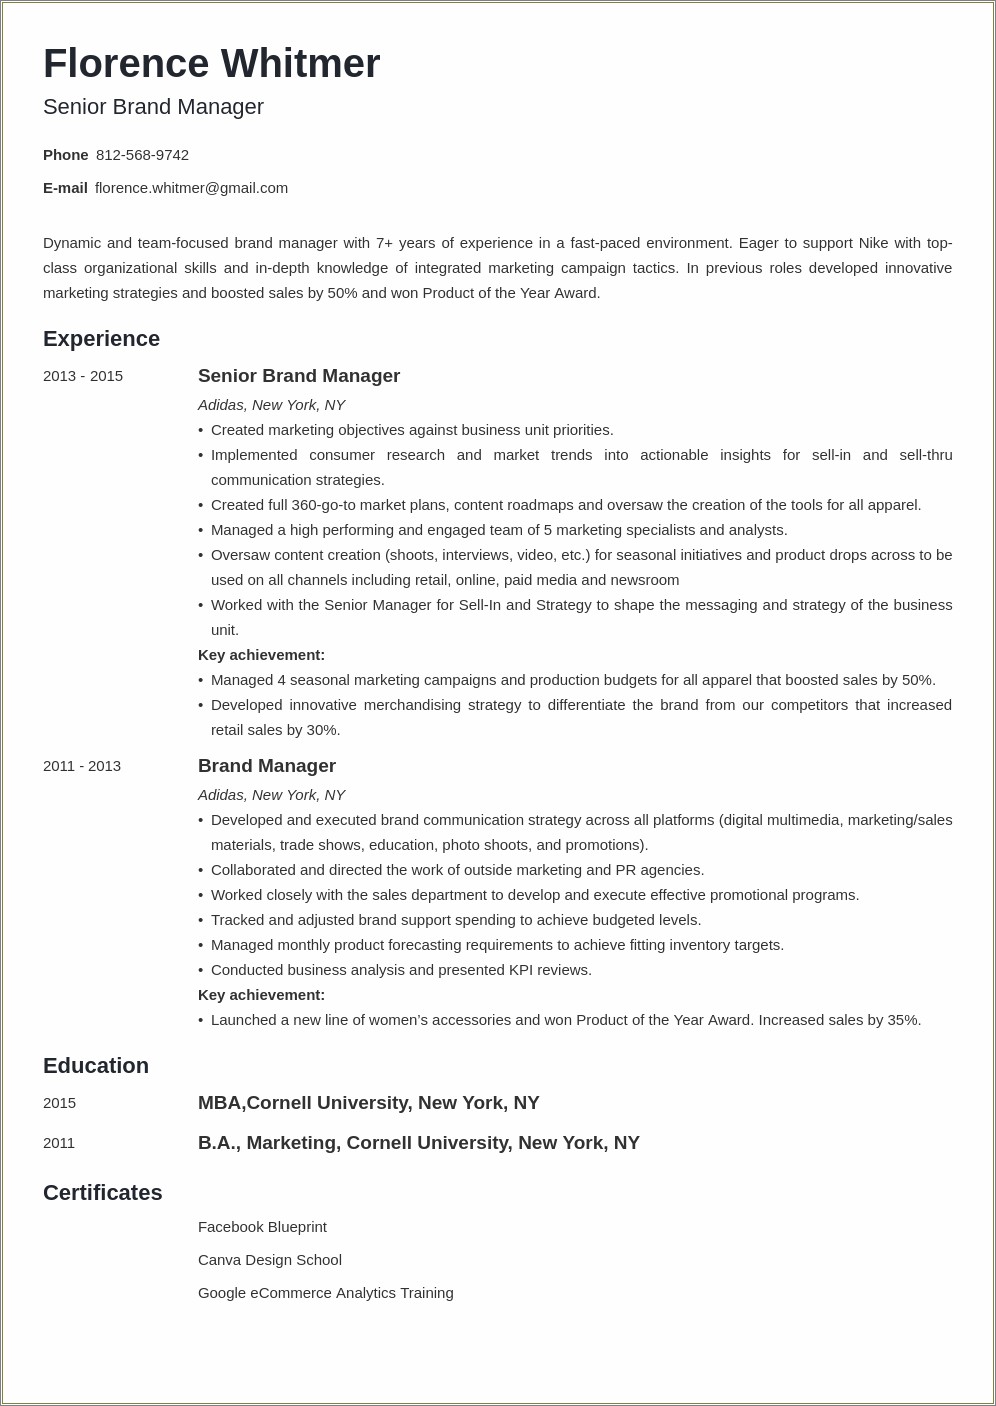 Production Manager Resume In Garment Industry